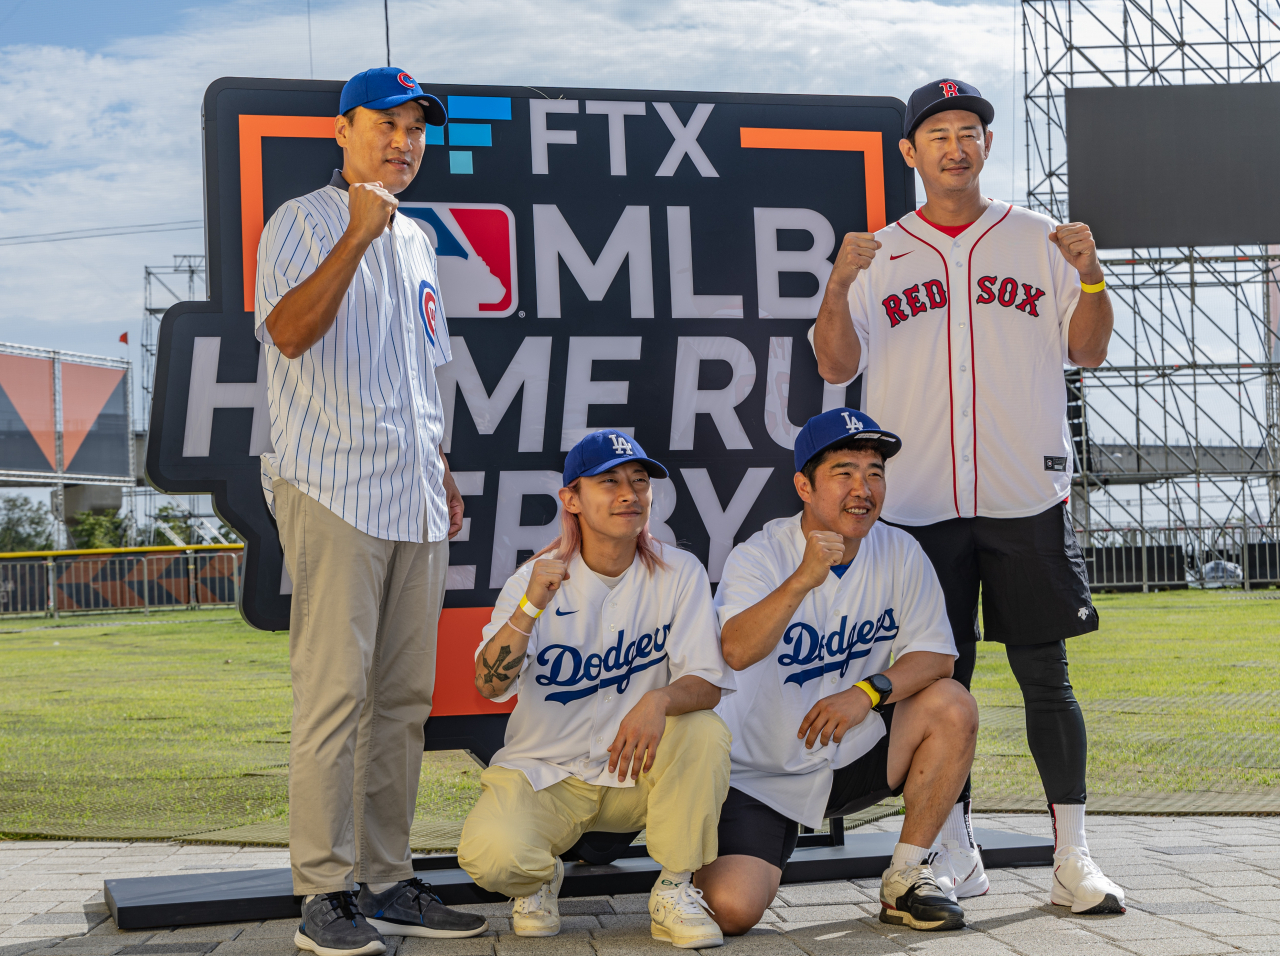 Participants of the FTX MLB Home Run Derby X pose for photos at Paradise City Hotel in Incheon, just west of Seoul, on Friday. From left: former Korea Baseball Organization (KBO) player Lee Seung-yuop, South Korean short track speed skater Kwak Yoon-gy, former KBO player Jeong Keun-woo and former KBO player Park Yong-taik. (Yonhap)